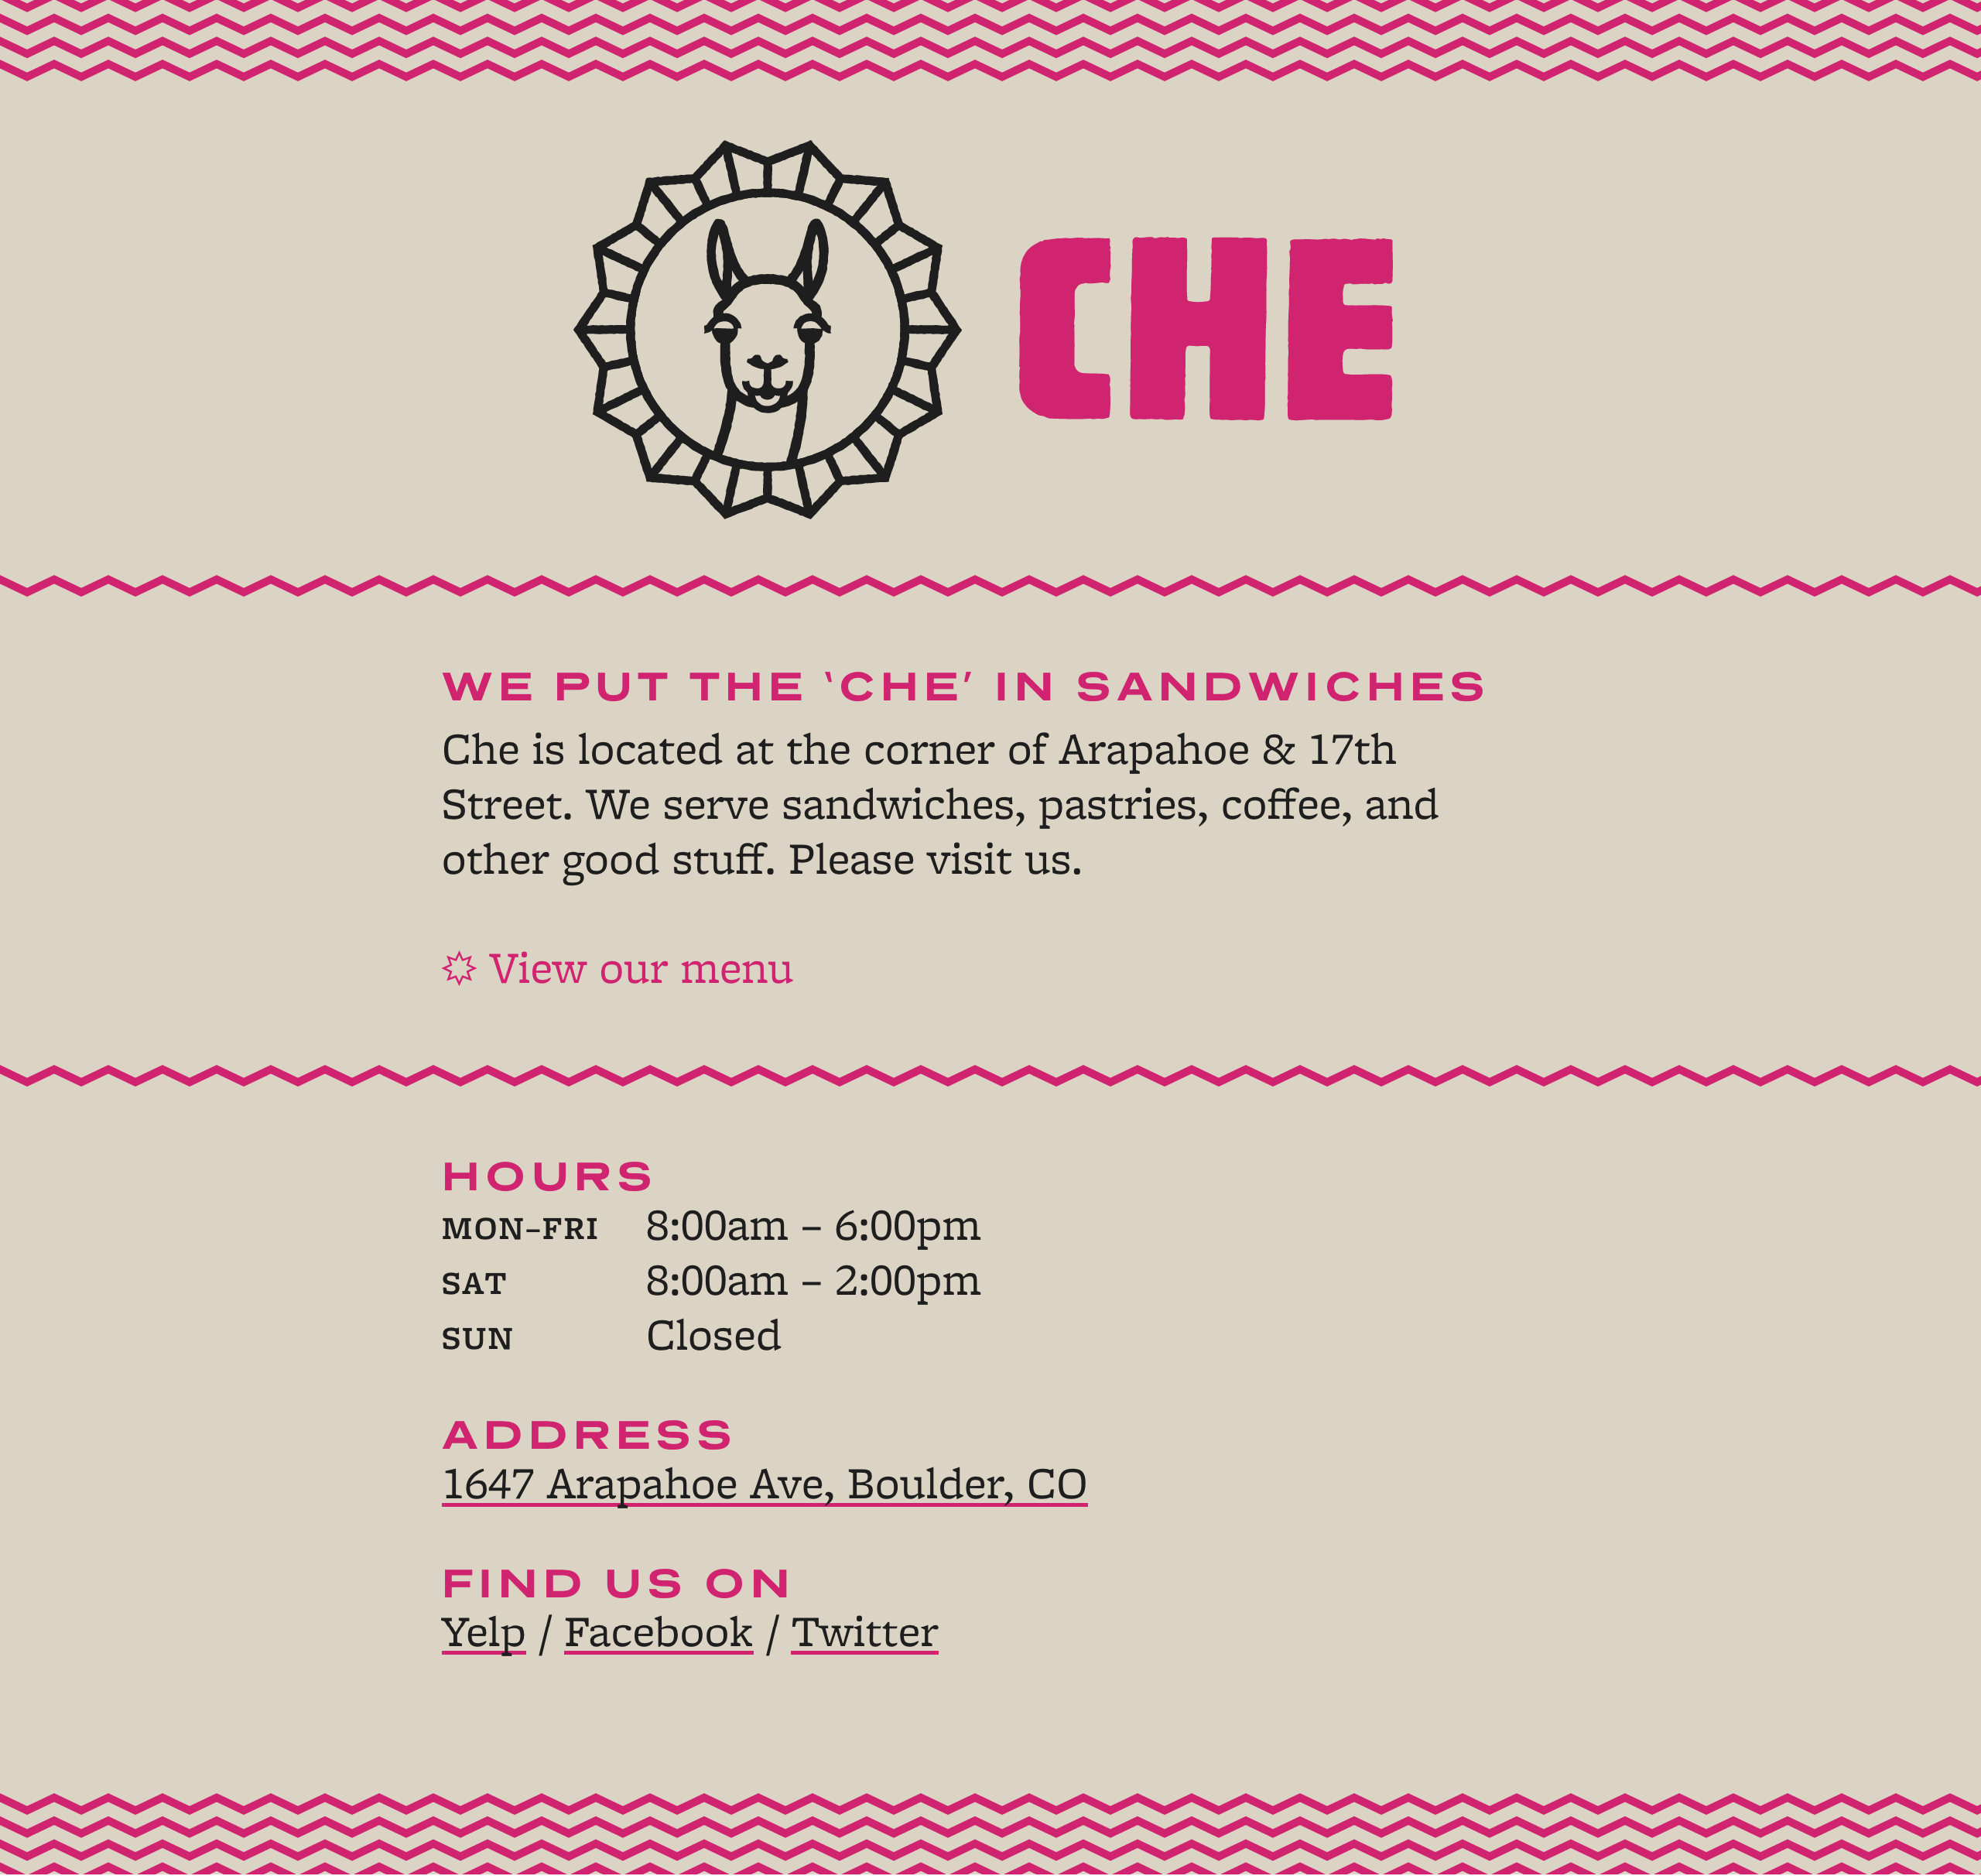 Cafe Che - Website